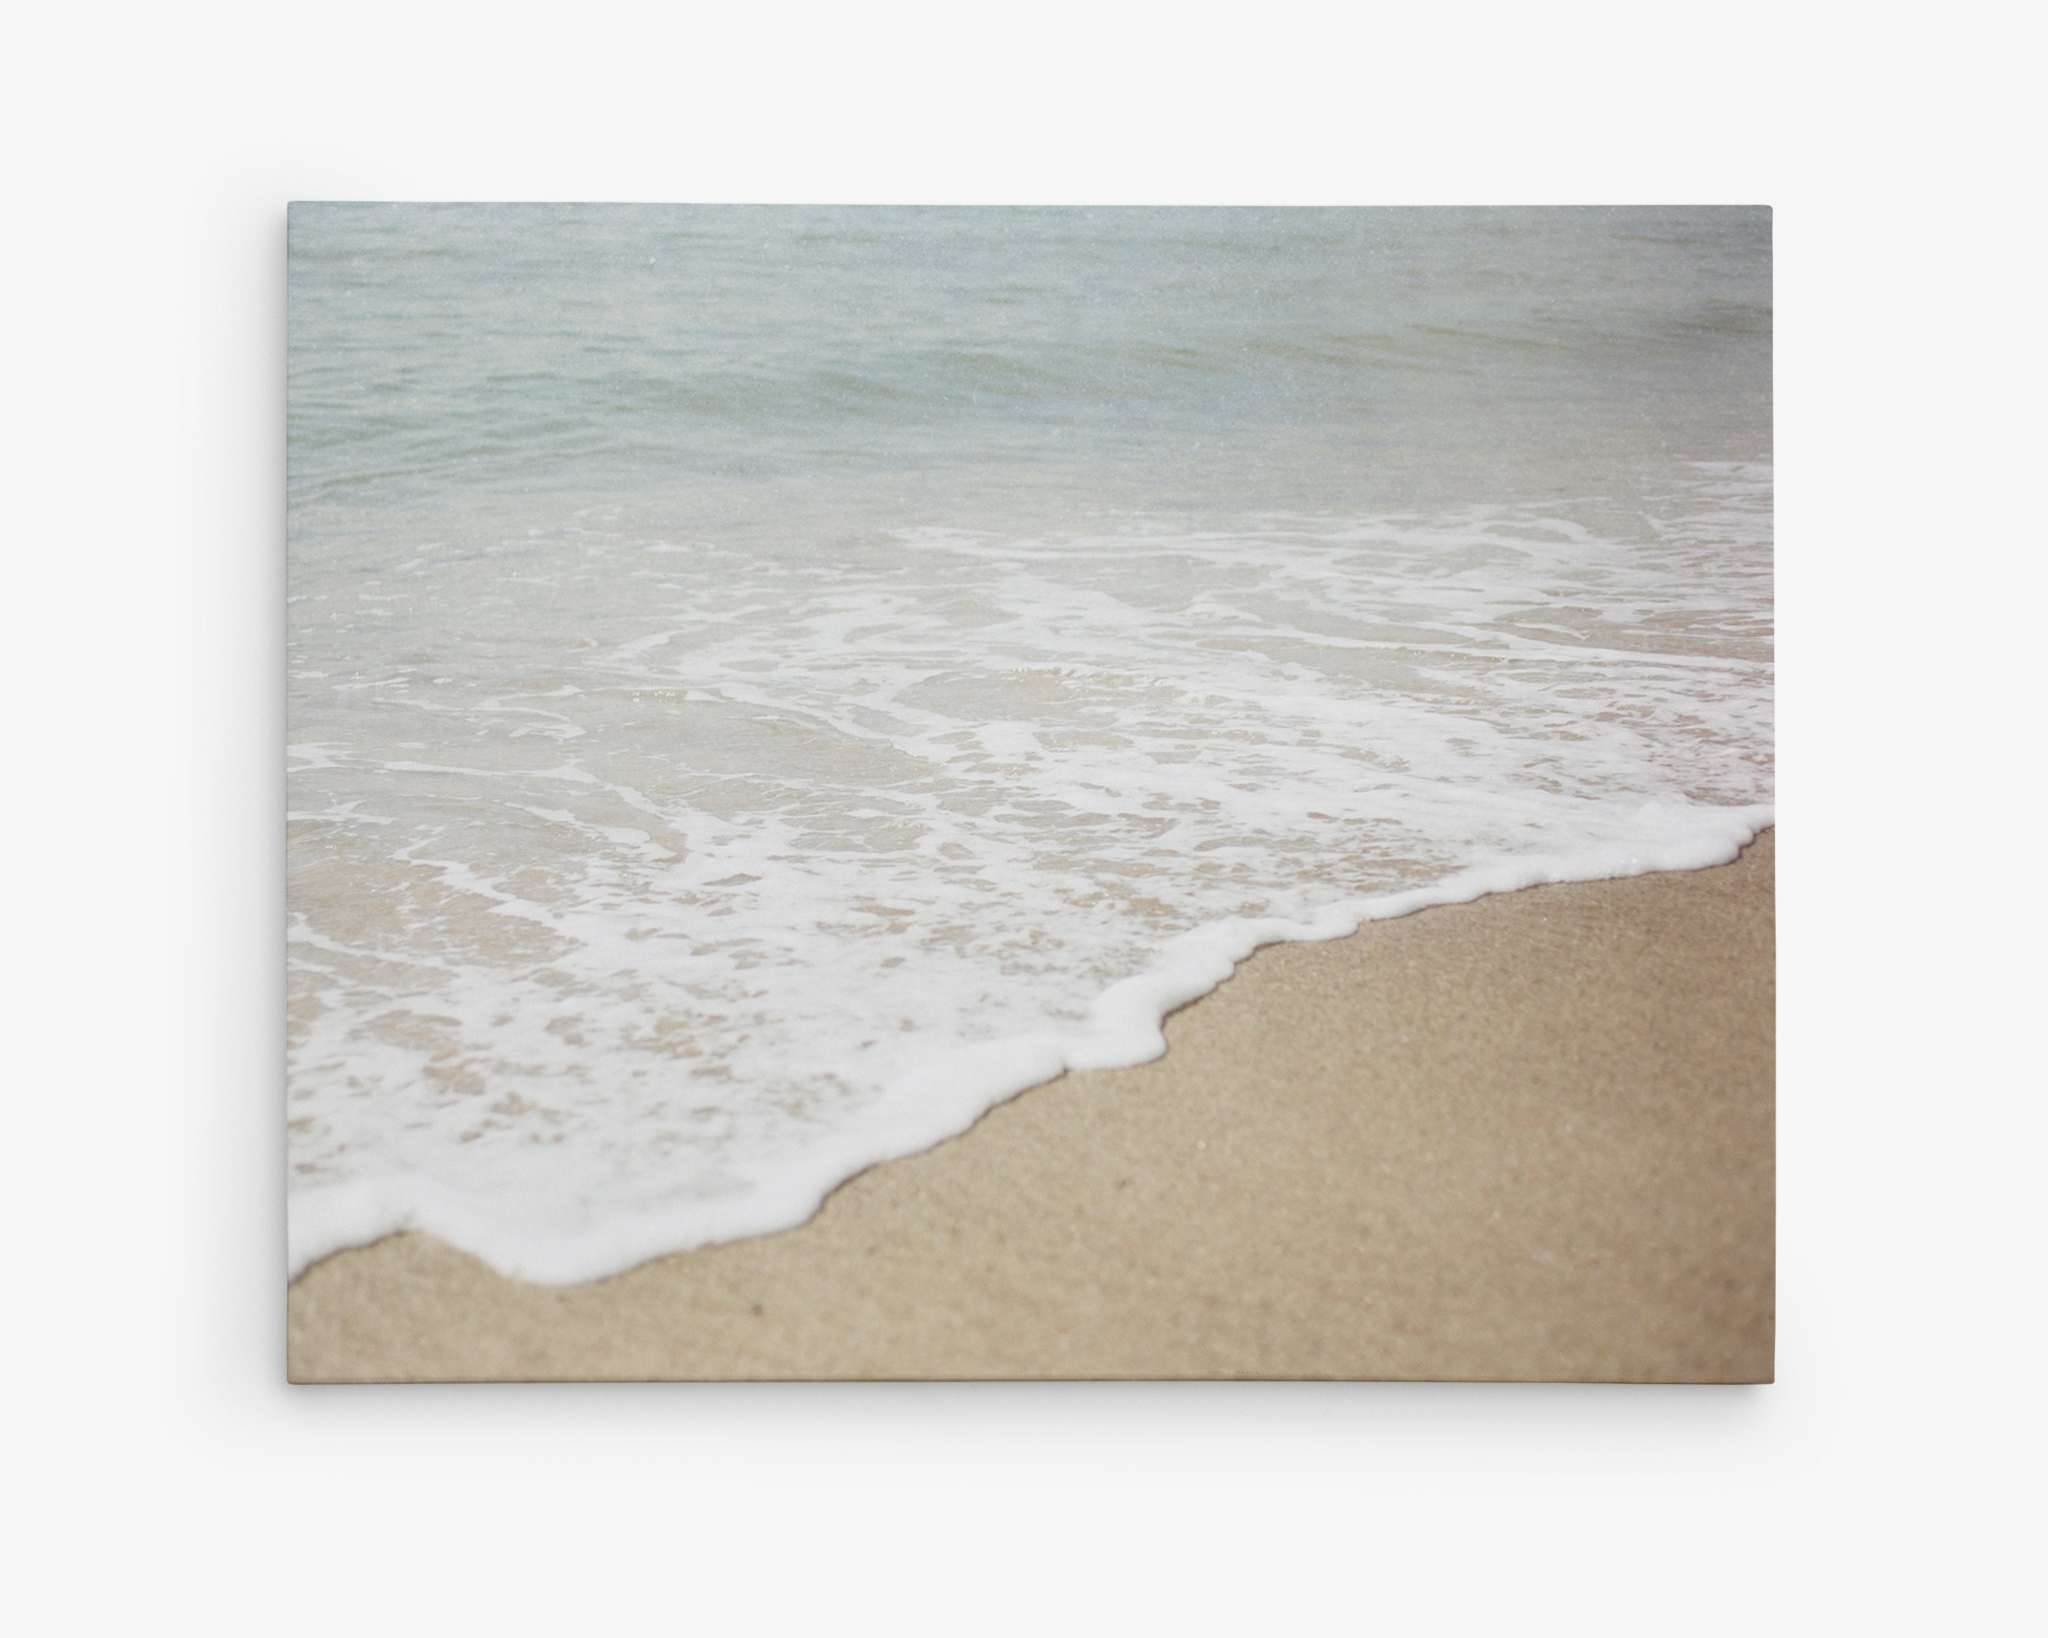 A serene beach scene of Will Rogers State Beach shows gentle waves lapping onto a sandy shore. The foam from the waves creates a white, frothy edge as it meets the beige sand, capturing a peaceful, coastal atmosphere. This image is available as Offley Green's premium artist-grade Beach Waves Canvas Wall Art, 'Chasing Surf,' with a gallery wrap finish.
